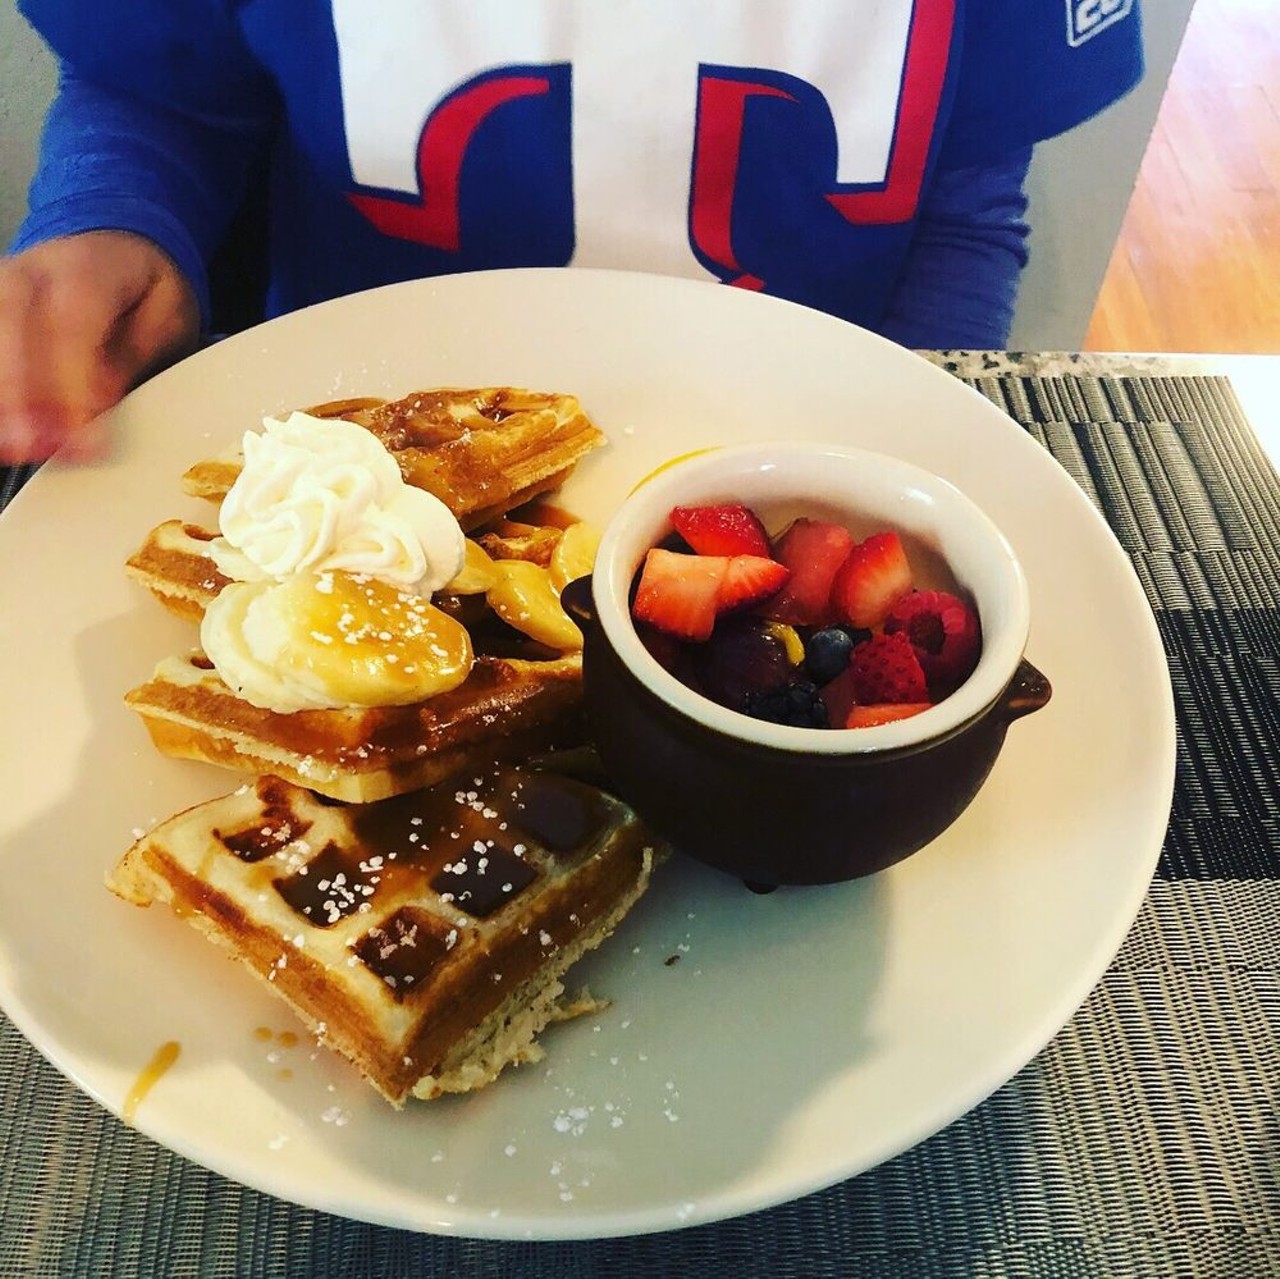 Leon Valley Cafe has a CRAZY loyal brunch following, and it's not difficult to see why! Check out those waffles with homemade caramel and banana sauce!